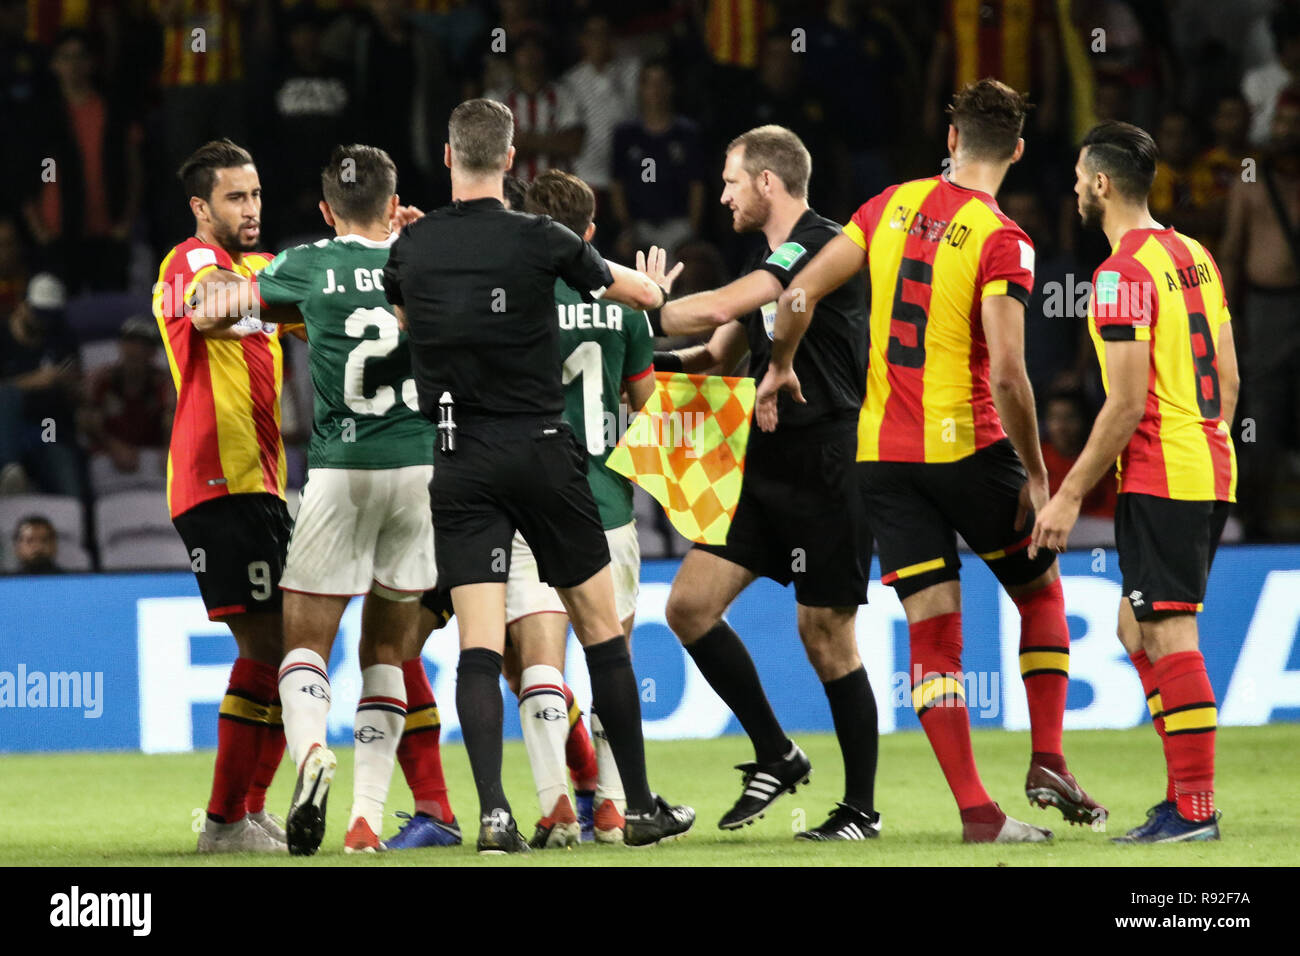 Al Ain, United Arab Emirates. 18th Dec, 2018. Es Tunis and CD Guadalajara players clash during the FIFA Club World Cup fifth place soccer match between ES Tunis and CD Guadalajara at Hazza Bin Zayed Stadium. Credit: Mohamed Flis/dpa/Alamy Live News Stock Photo